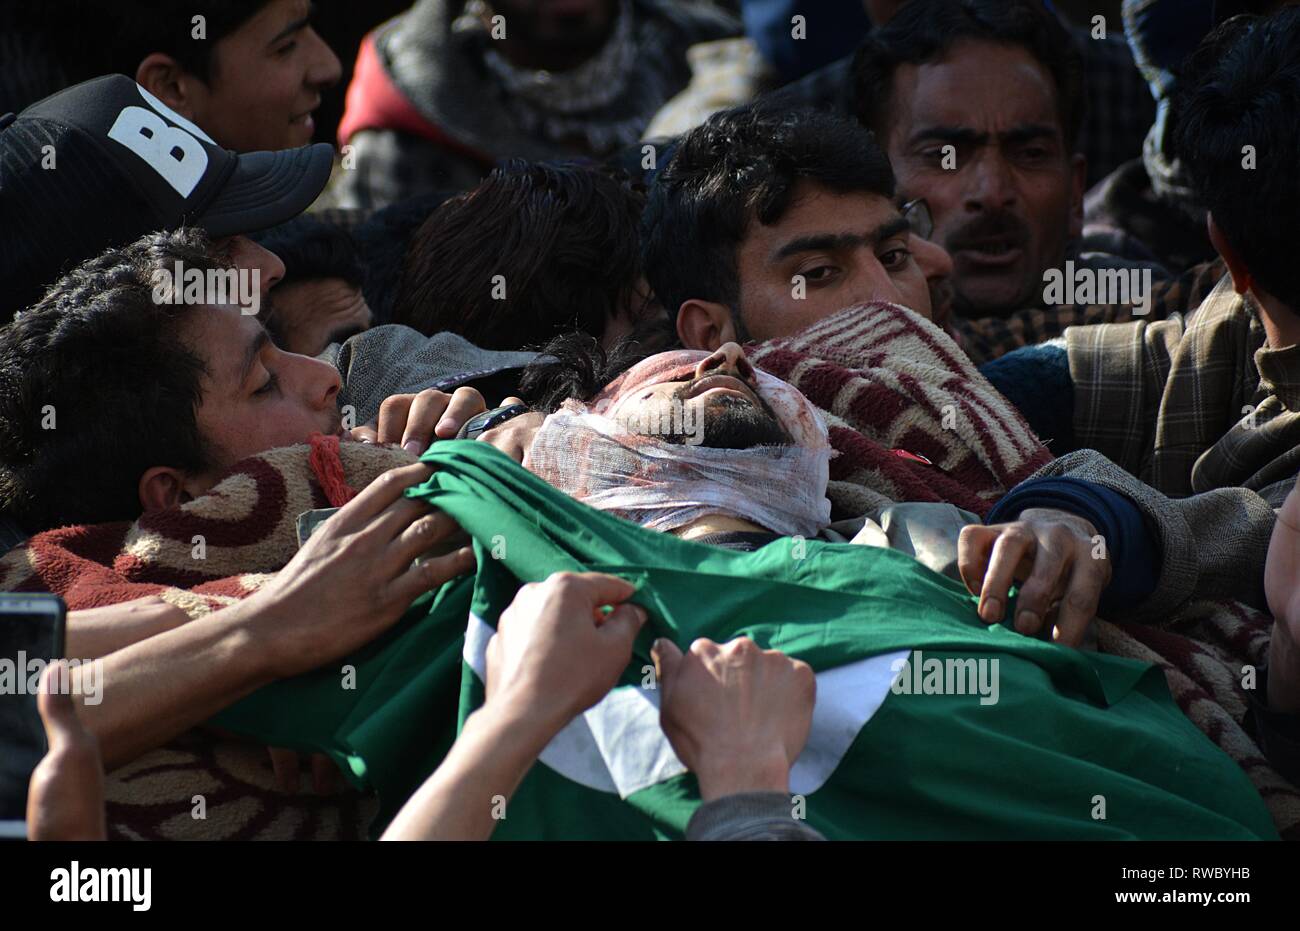 March 5, 2019 - Tral, Jammu and Kashmir, India - Dead body of a local militant Irfan Ahmad Rather is being carried by villagers in his native village Sharief Abad area of Tral some 45 kilometers from Srinagar, Kashmir on March 05, 2019.Indian security forces killed two militants when the gun-battle broke out between militants and government forces in Reshipora area of Tral in south Kashmir. (Credit Image: © Faisal KhanZUMA Wire) Stock Photo